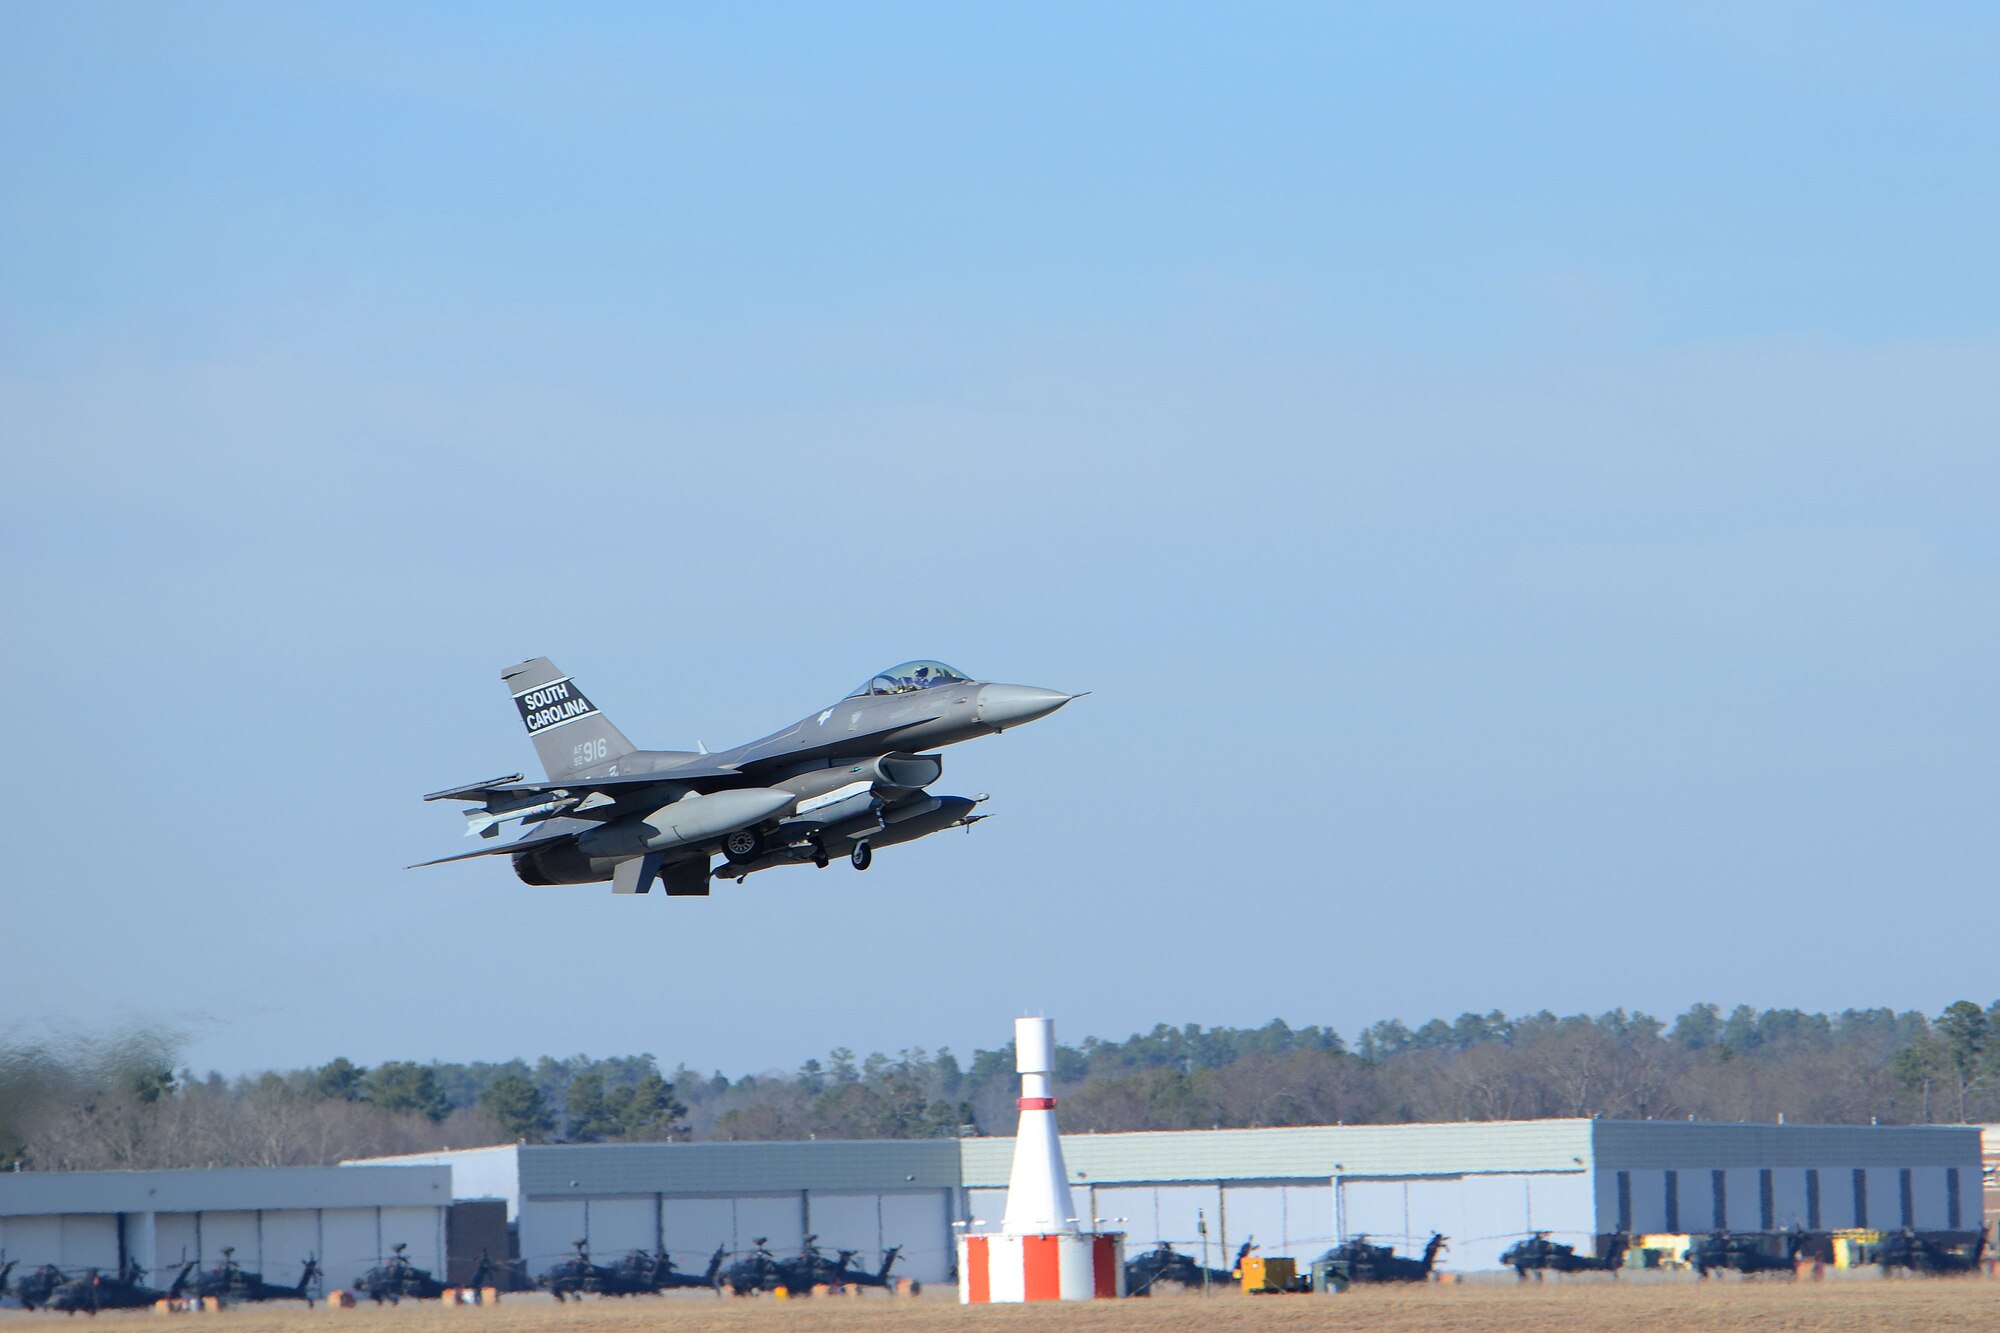 A U.S. Air Force fighter pilot, assigned to the 157th Fighter Squadron at McEntire Joint National Guard Base, South Carolina Air National Guard, launches an F-16 Fighting Falcon druing surge flying operations Feb. 7, 2015. The surge encompasses high tempo flying as part of vital training for deployments. (U.S. Air National Guard photo by Airman 1st Class Ashleigh S. Pavelek/Released)